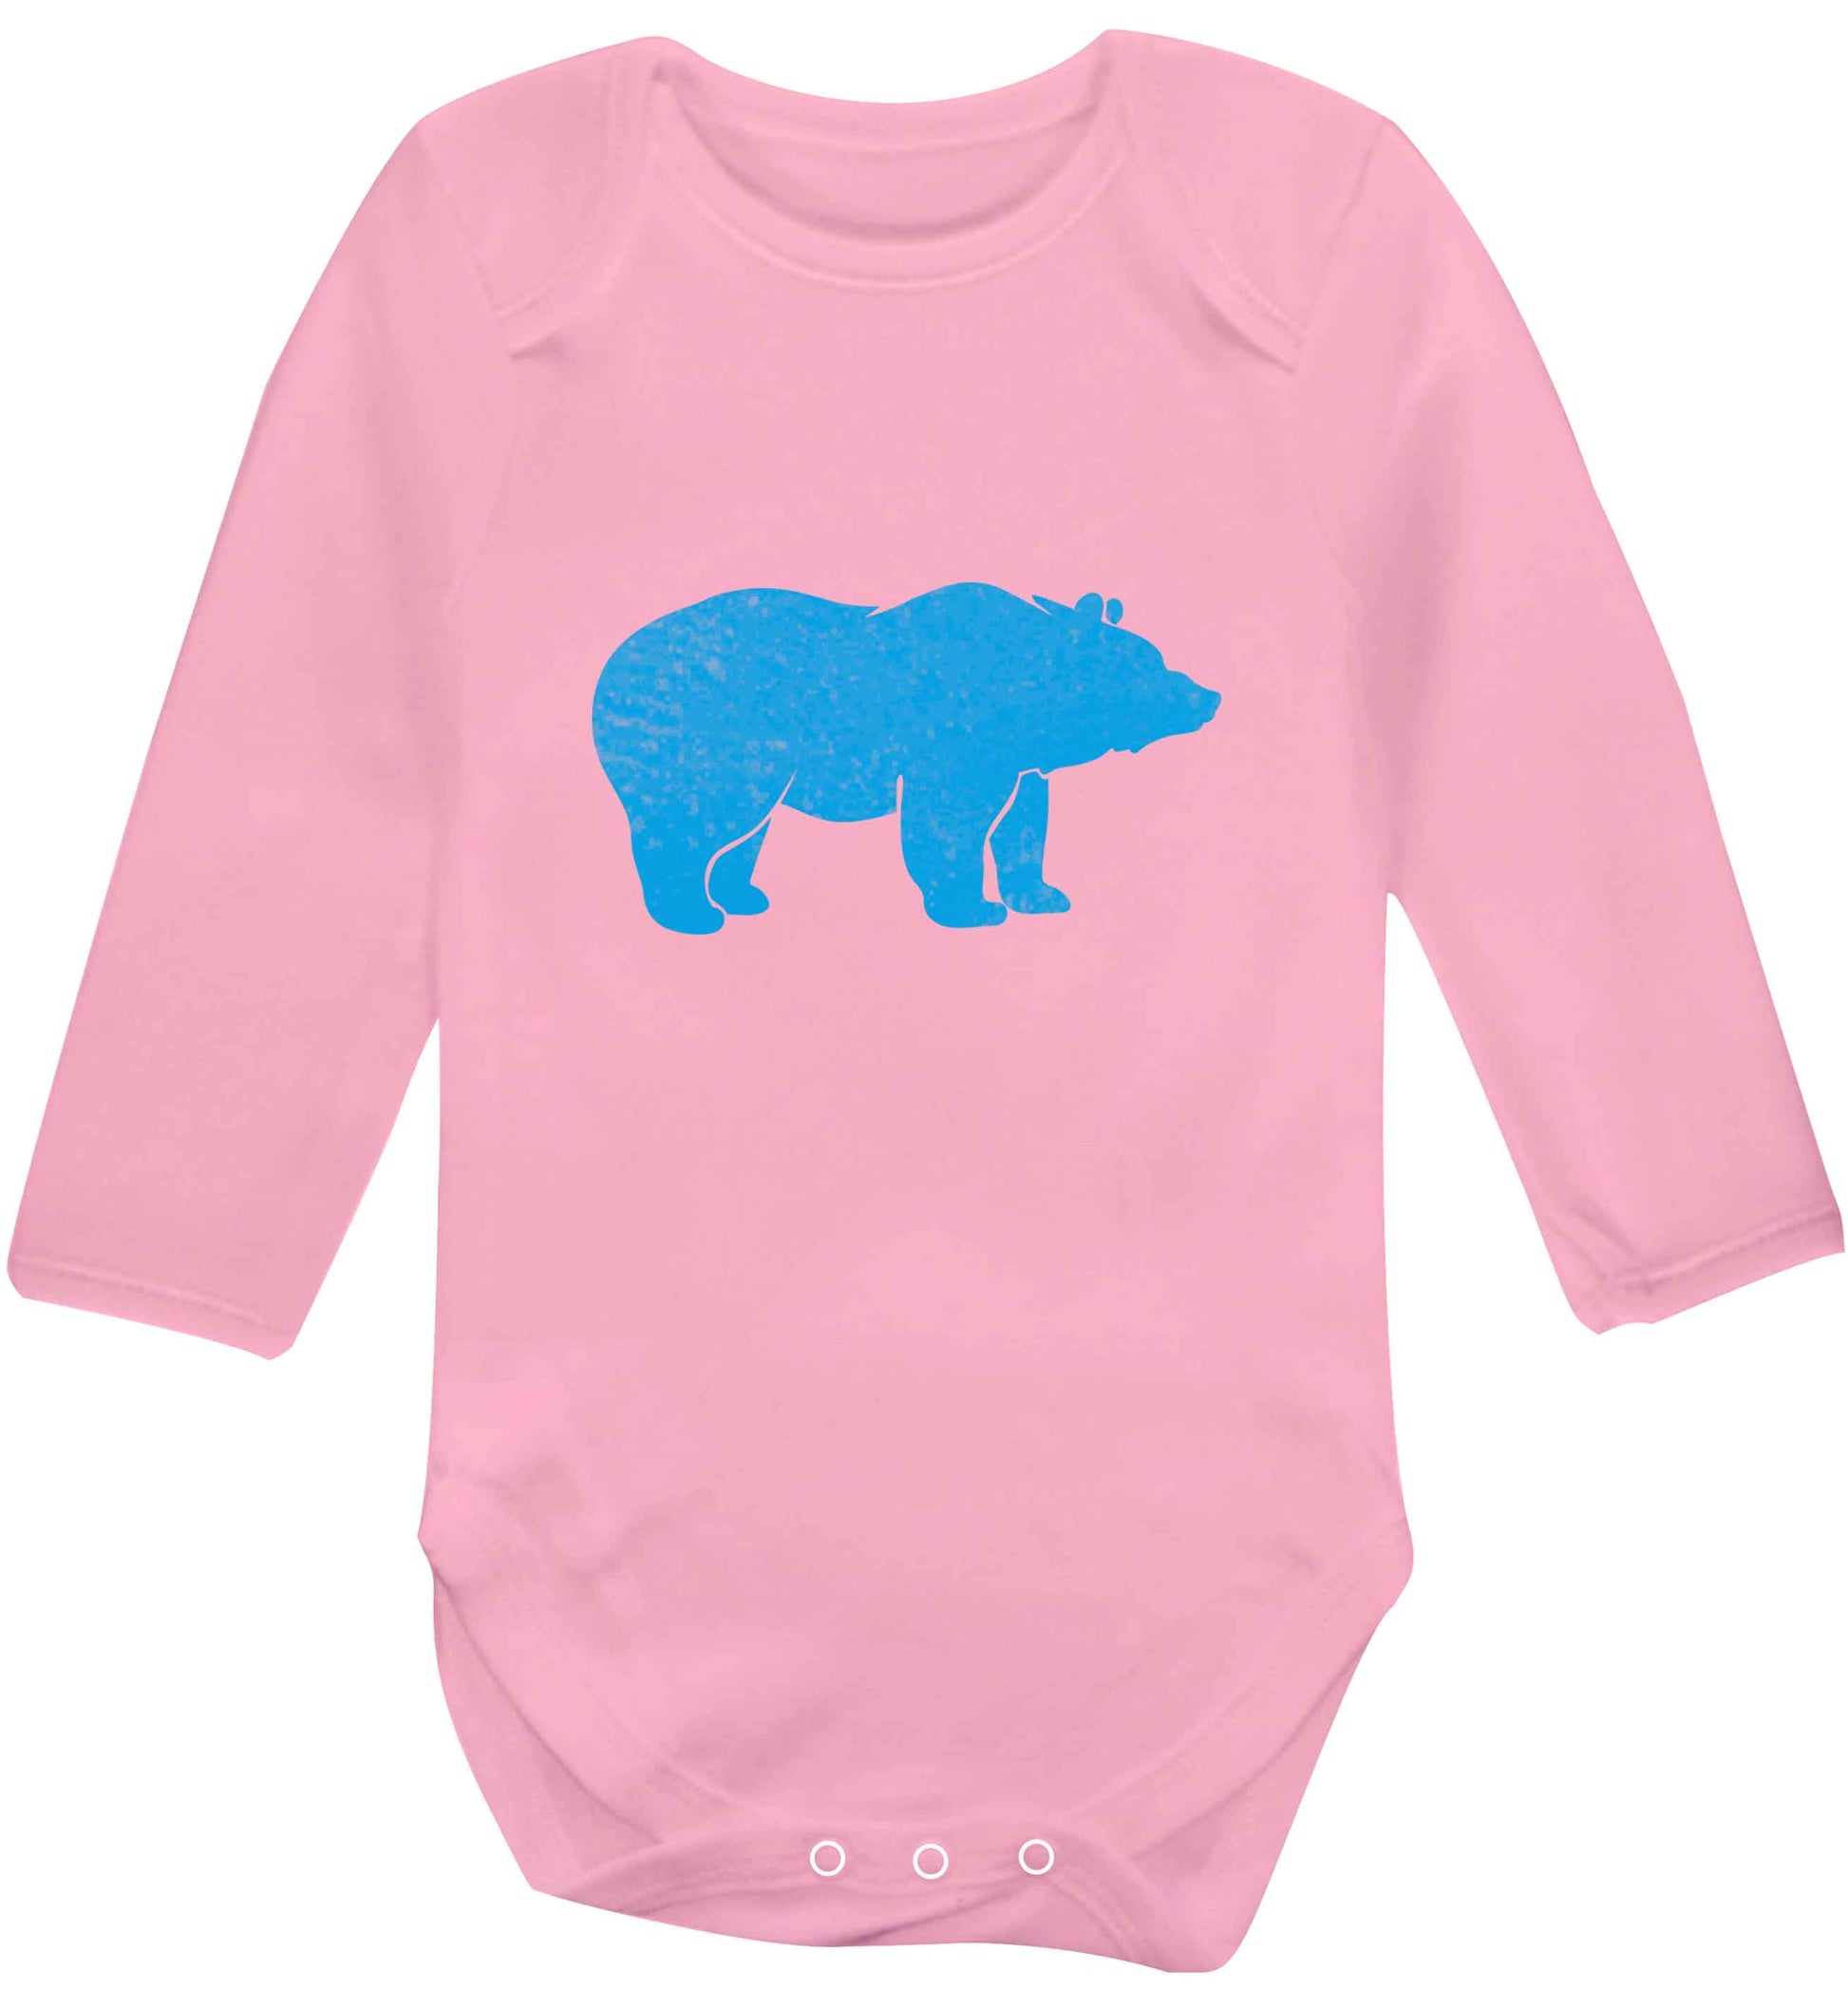 Blue bear baby vest long sleeved pale pink 6-12 months